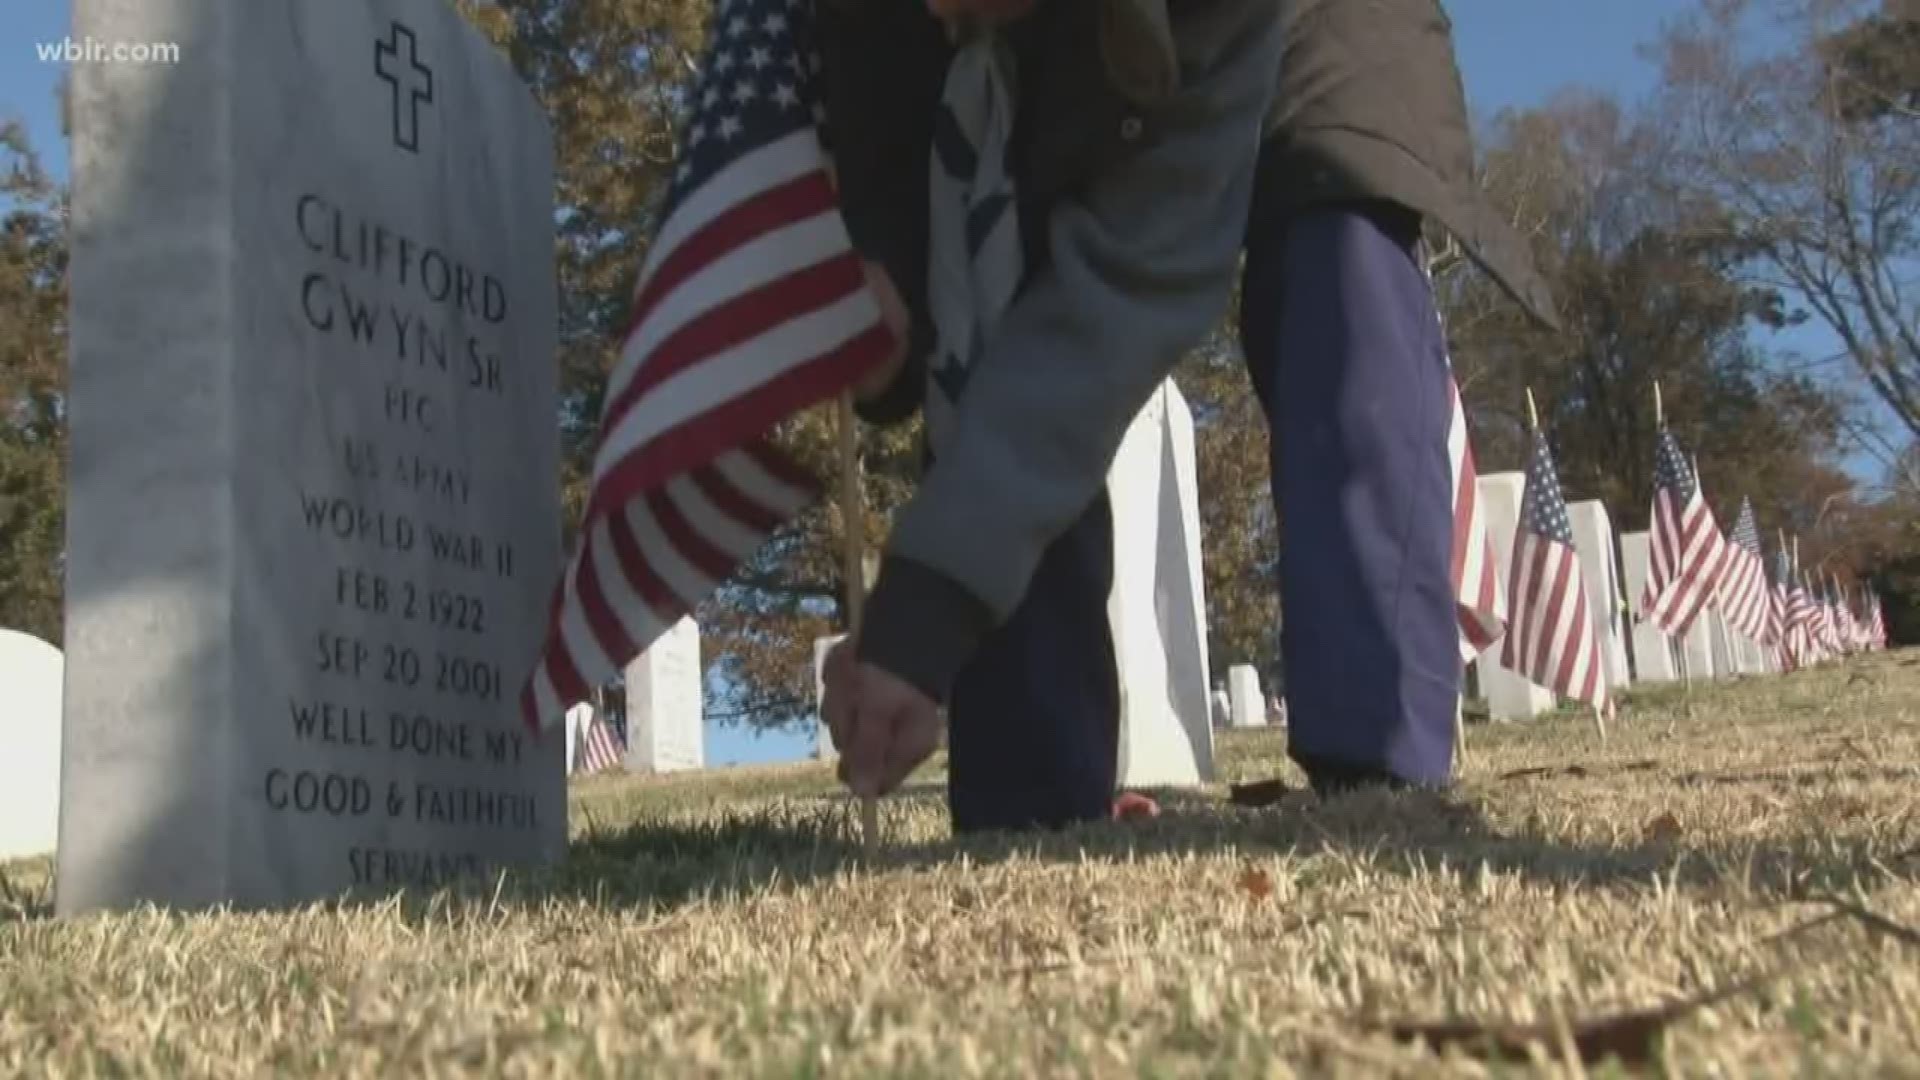 Volunteers paid their respects by placing American flags along each veteran's grave.